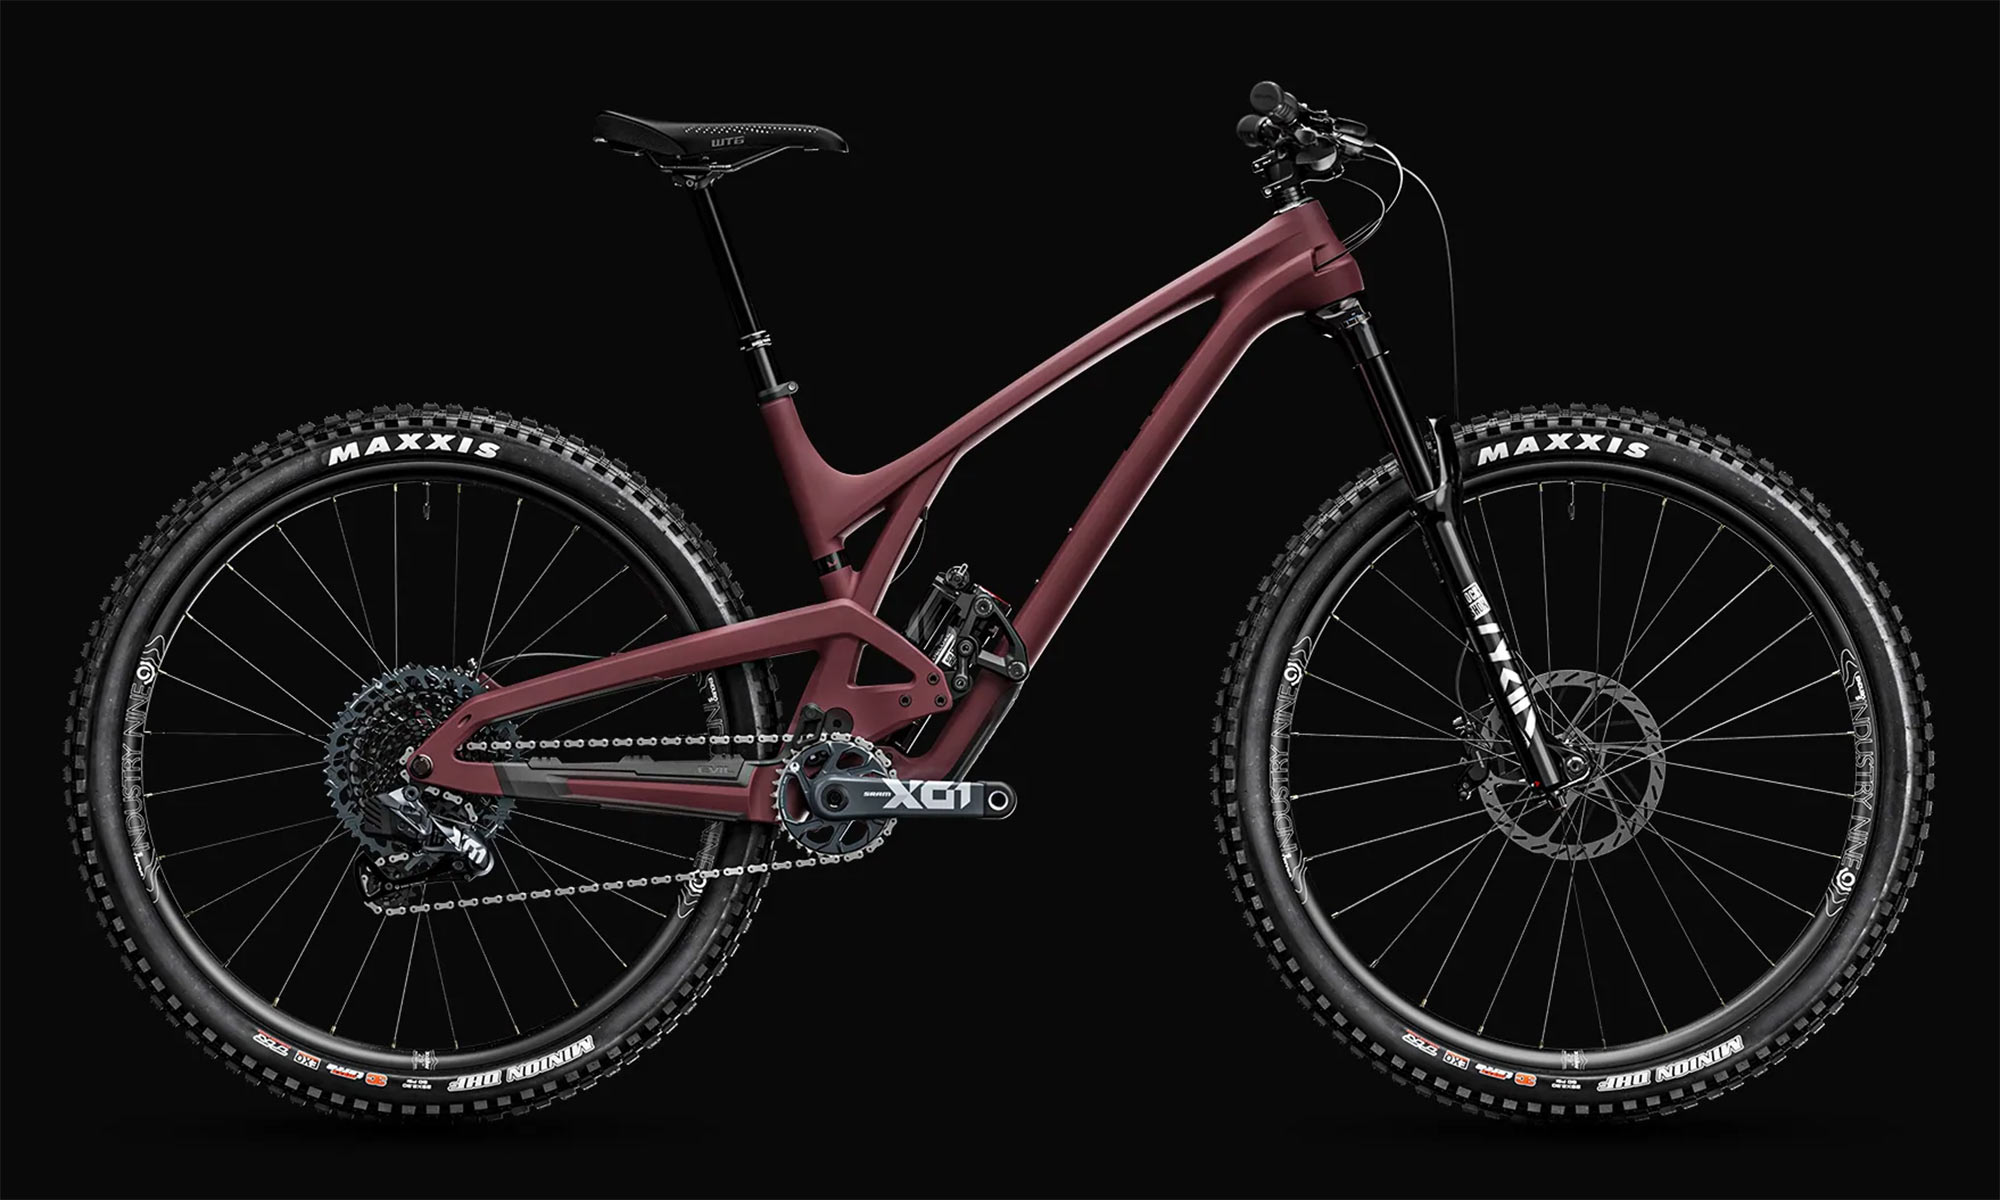 2022 Evil Offering LS 141mm carbon trail bike lightly salted updates, X01 AXS